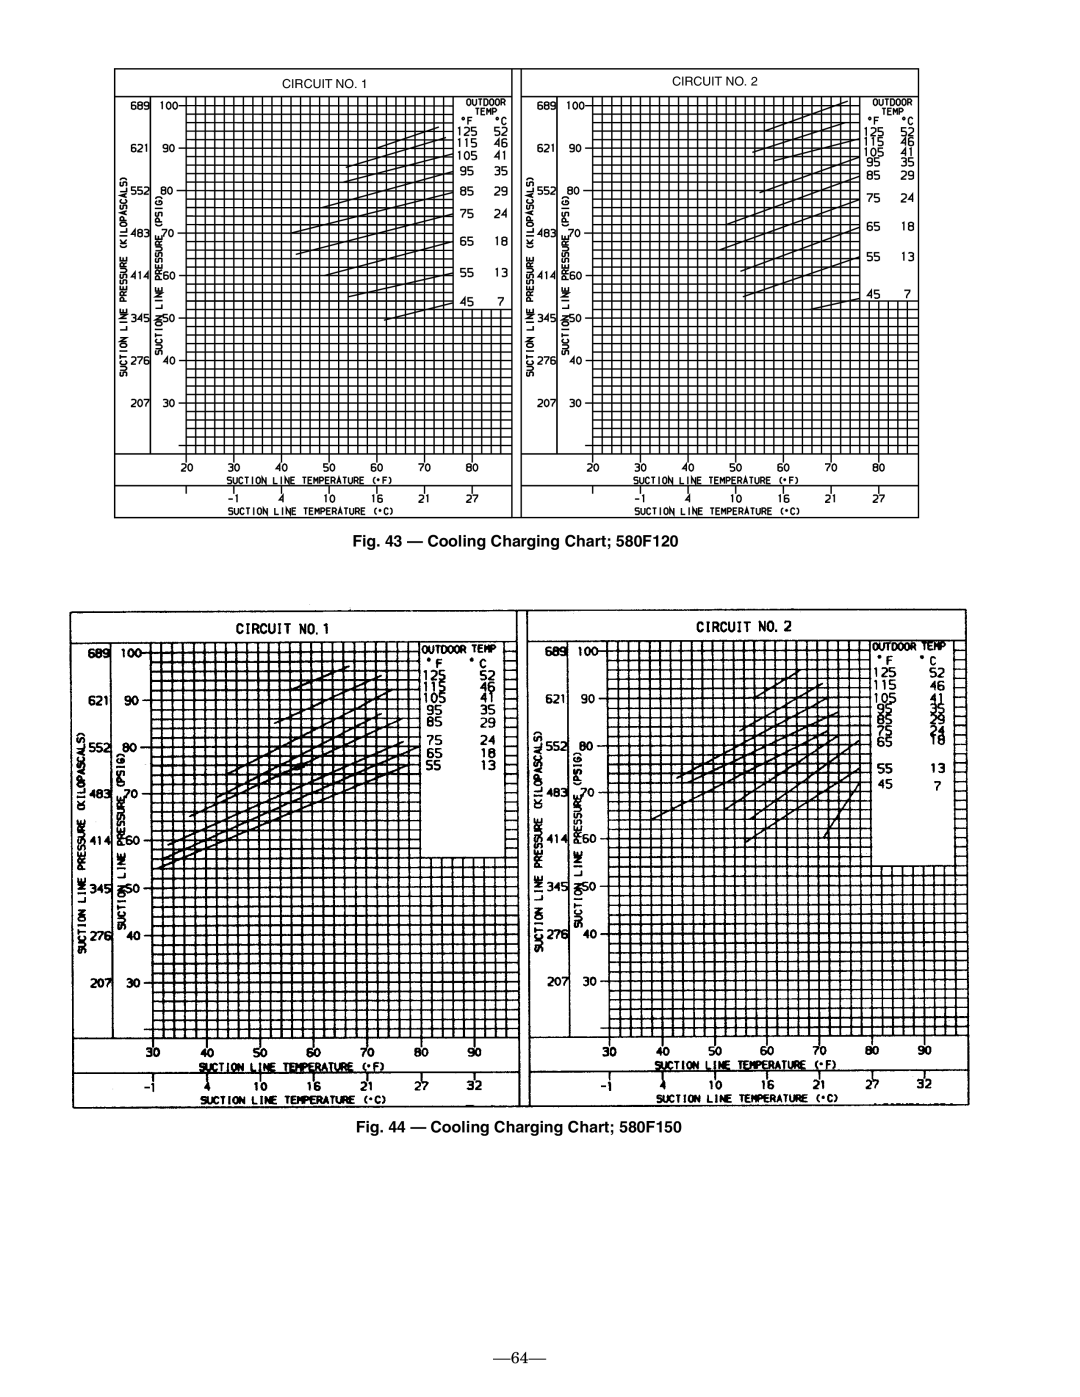 Bryant installation instructions 64, Cooling Charging Chart; 580F120, Cooling Charging Chart; 580F150 